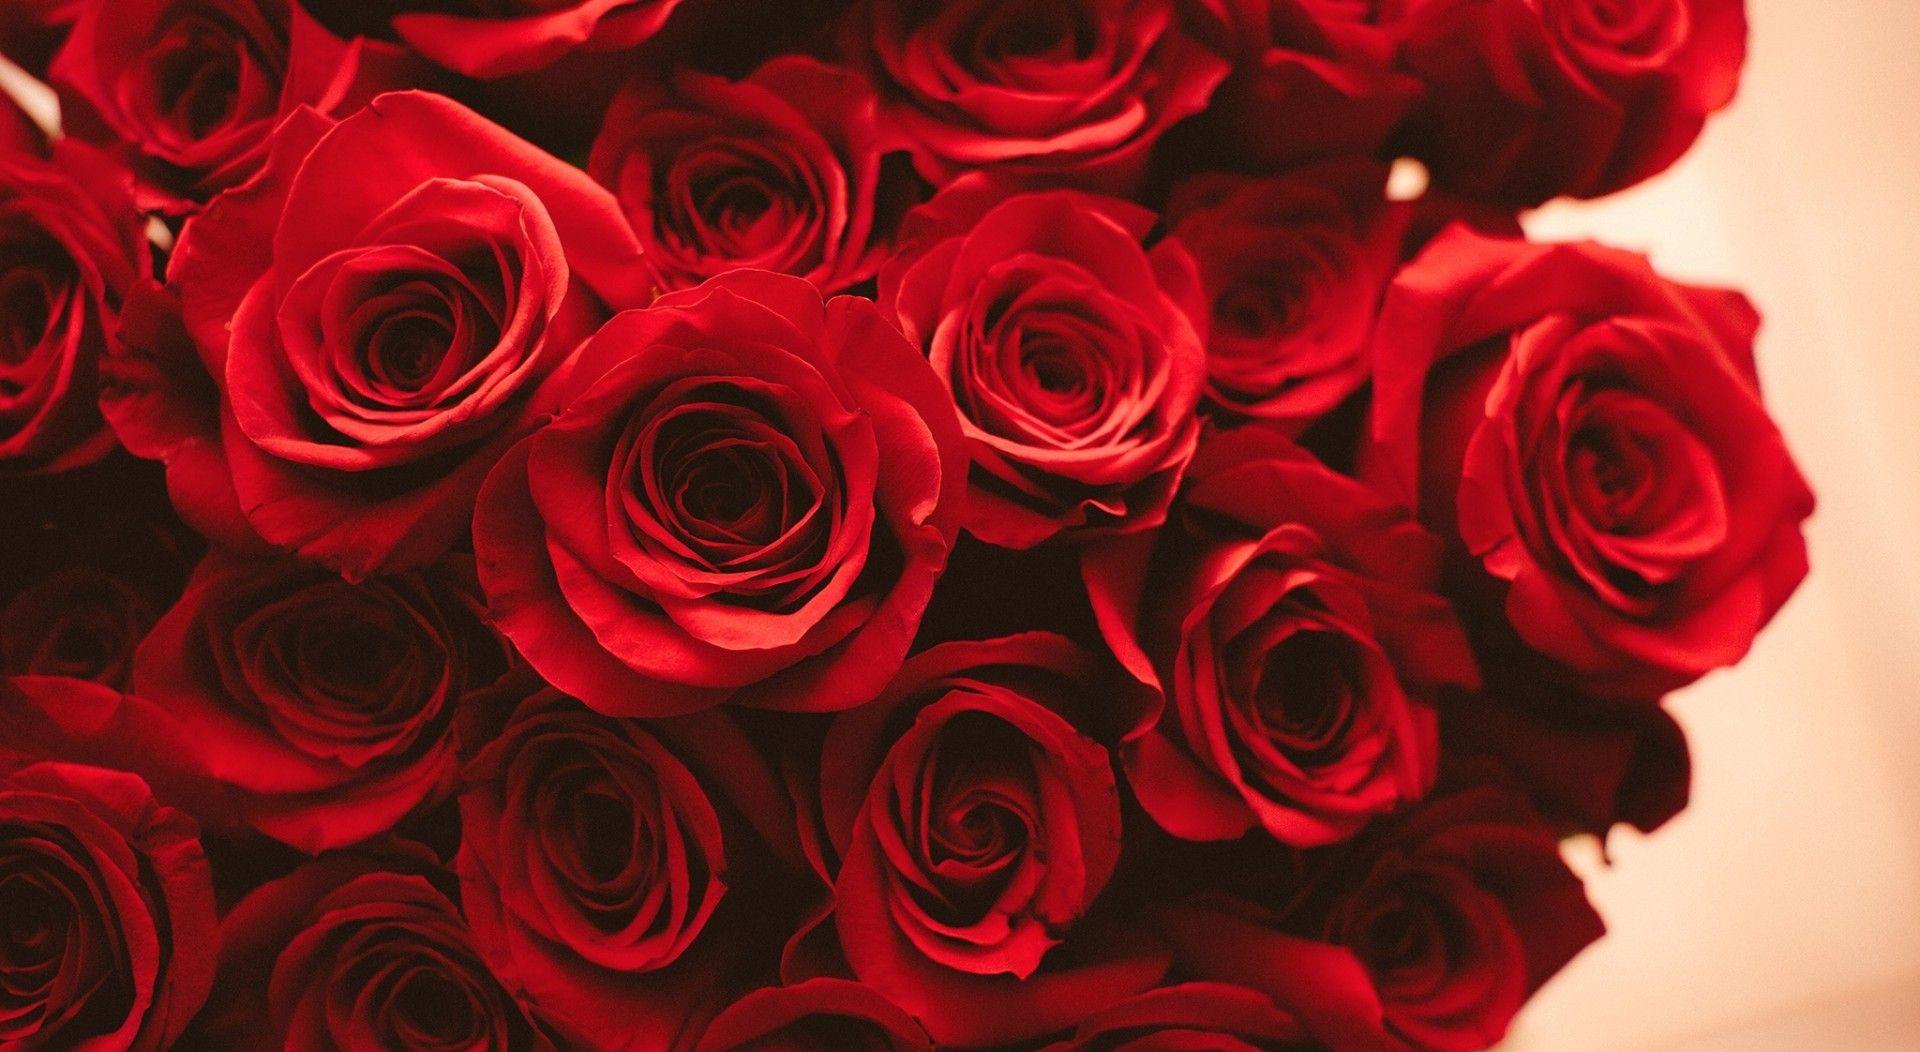  Aesthetic  Rose  Computer Wallpapers  Top Free Aesthetic  